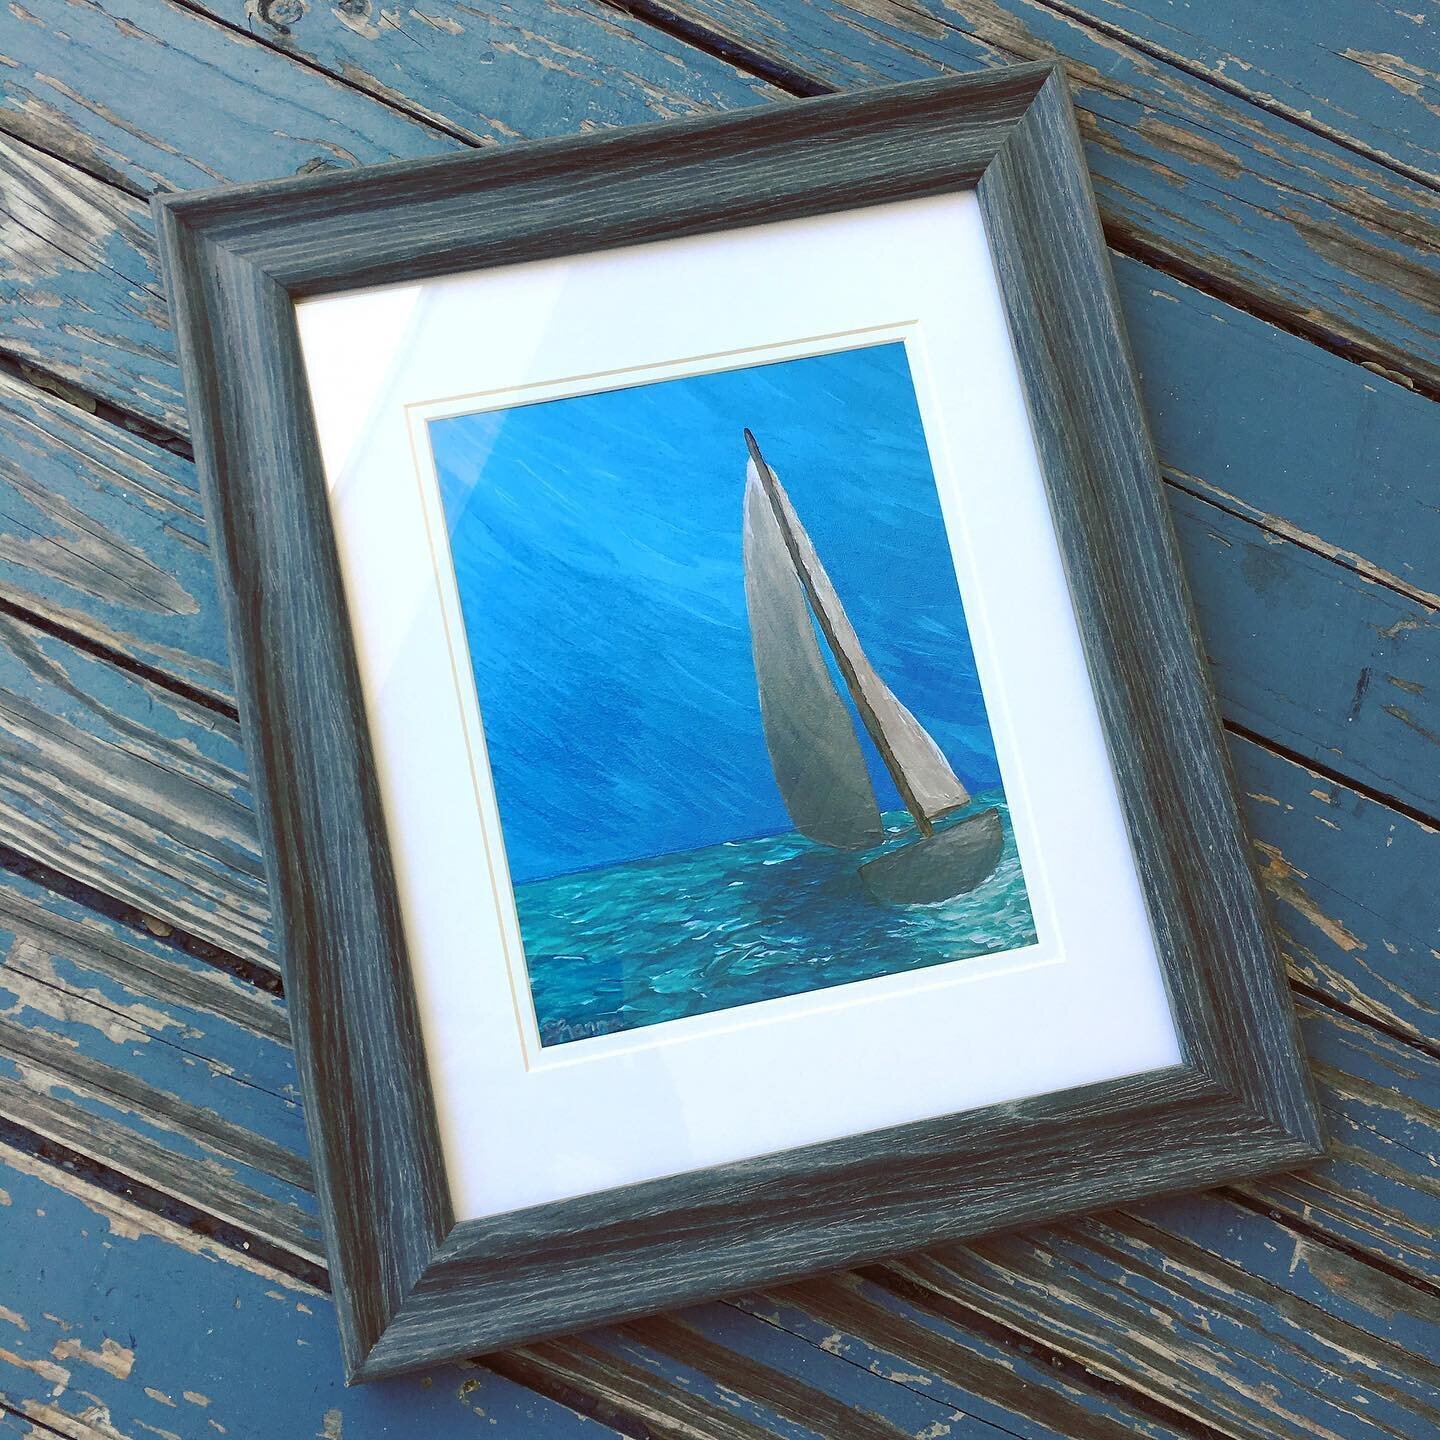 S A I L  A W A Y . . .
.
.
I pray that Heaven has an ocean
so in it you will see
the depth and breadth of God&rsquo;s astounding love
for you and me. 
💙
.
.
&ldquo;Sail Away&rdquo; Original Acrylic on Canvas *Prints Available*
.
.
#sailaway #sailboa